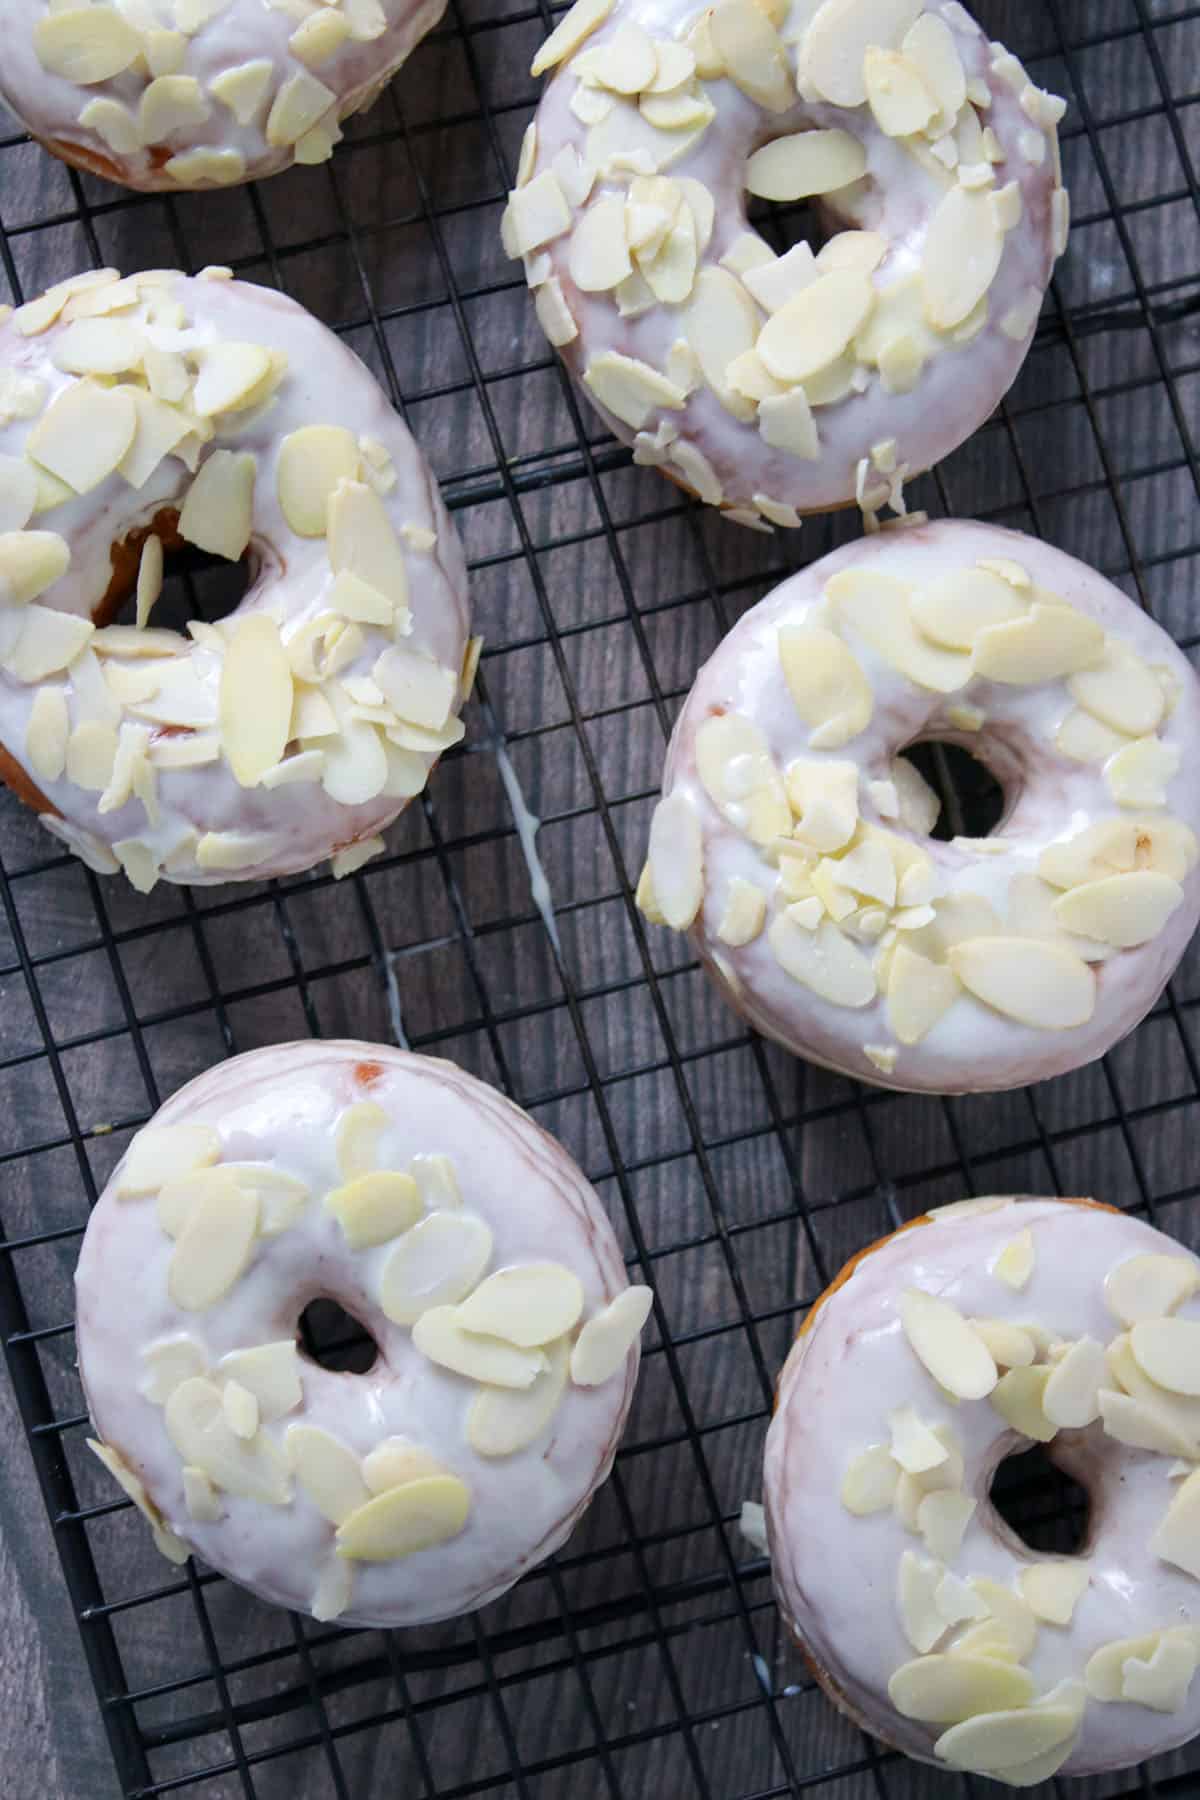 Top shot view of yeast donuts with white chocolate glaze.